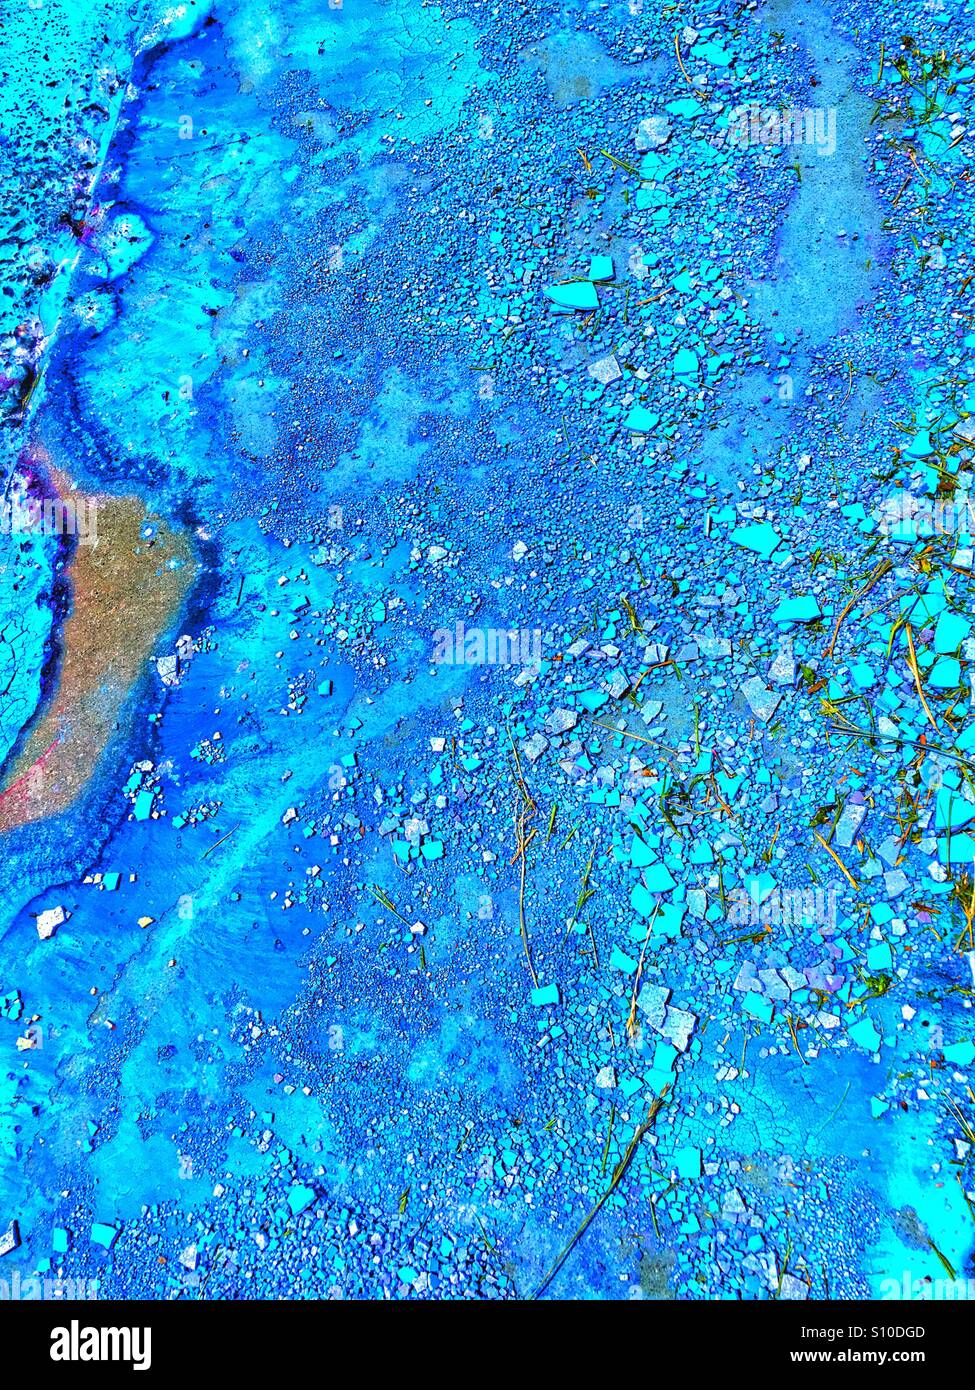 Blue paint spilled and dried on pavement Stock Photo